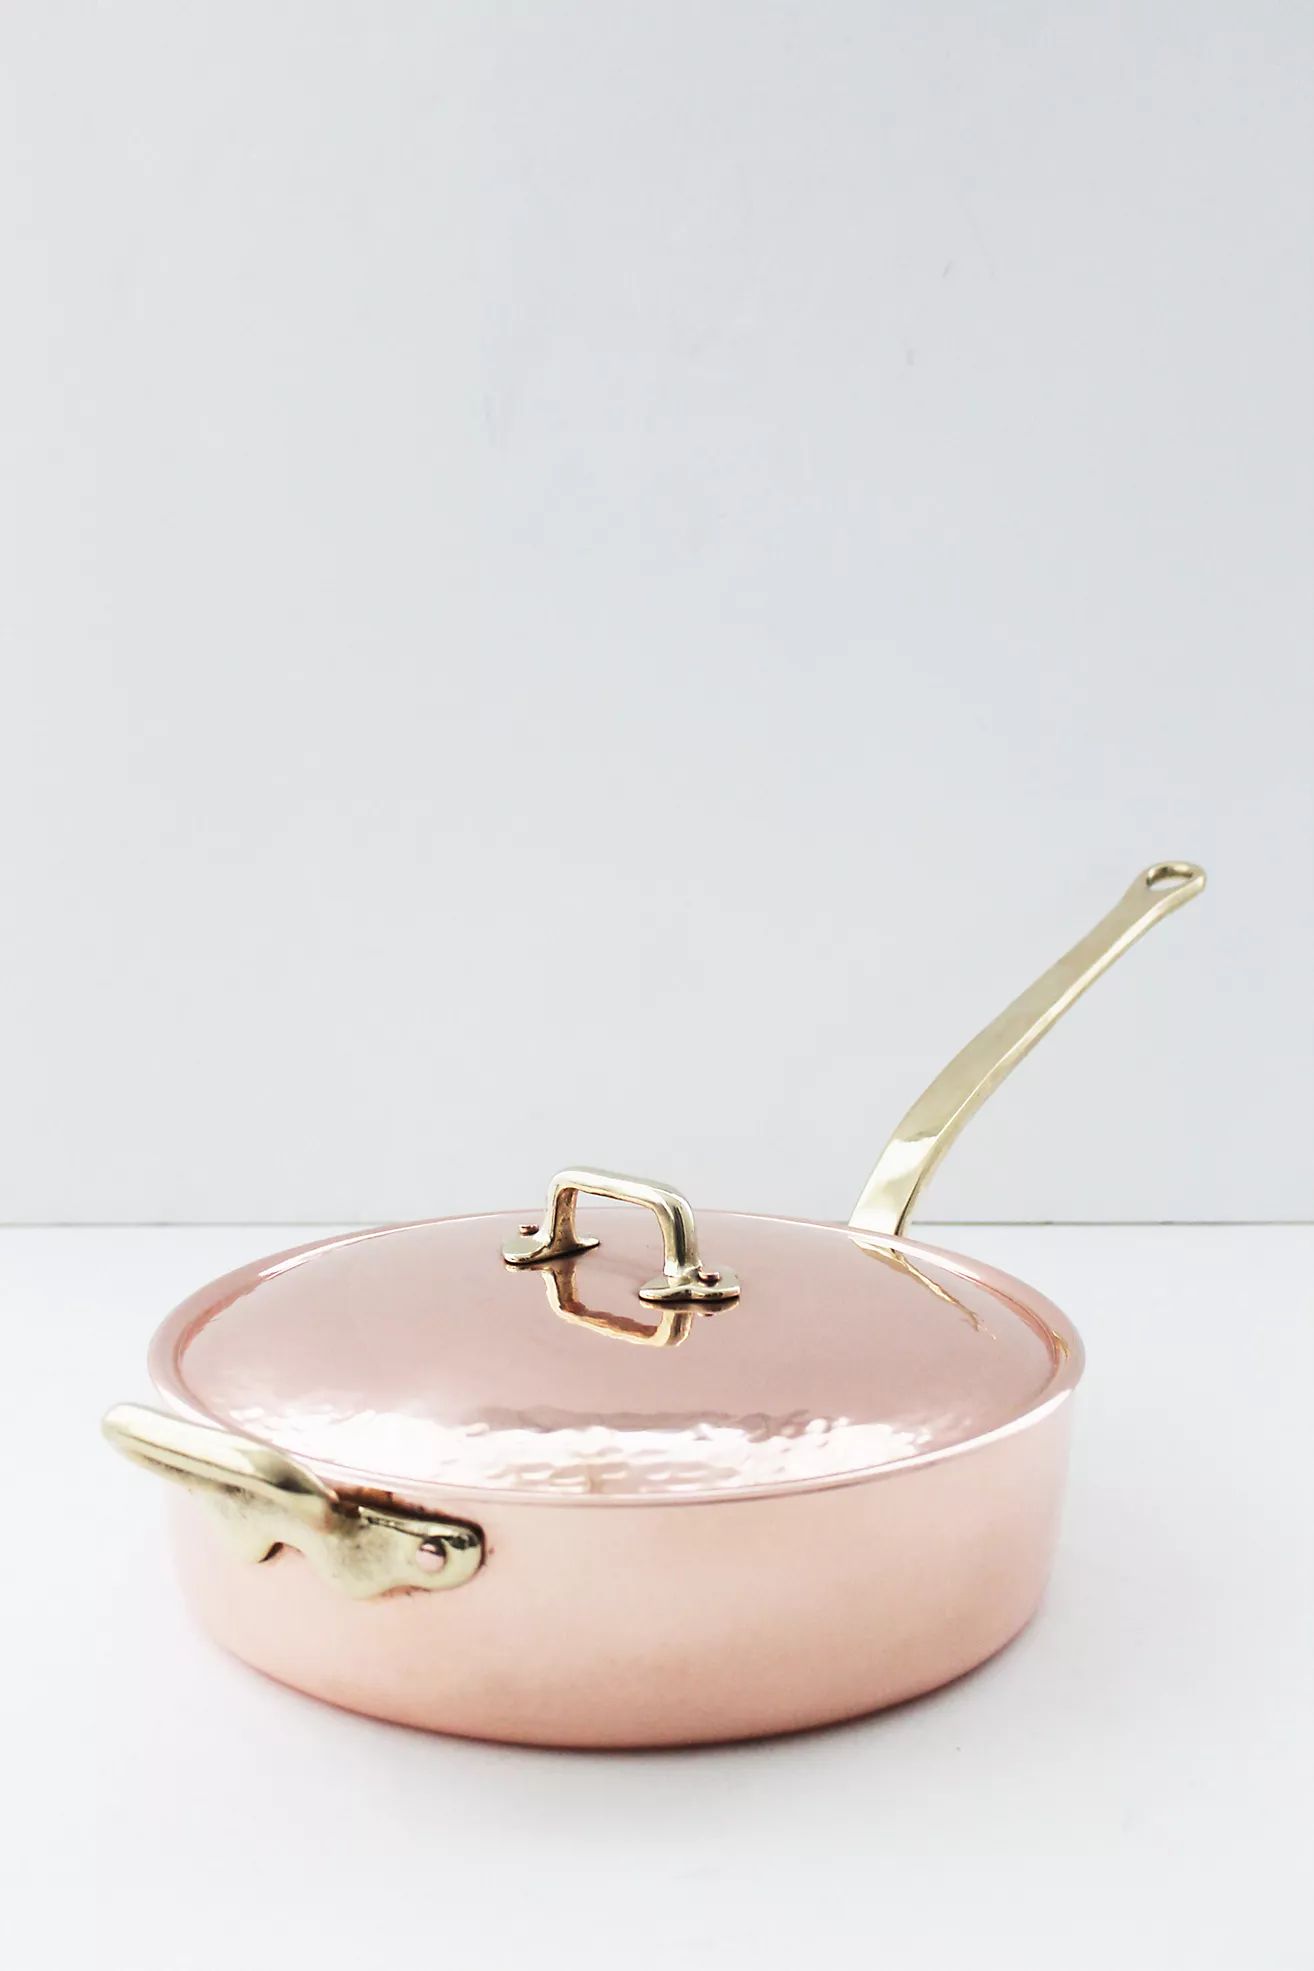 Coppermill Kitchen Vintage Inspired Saute Pan With Lid | Anthropologie (US)